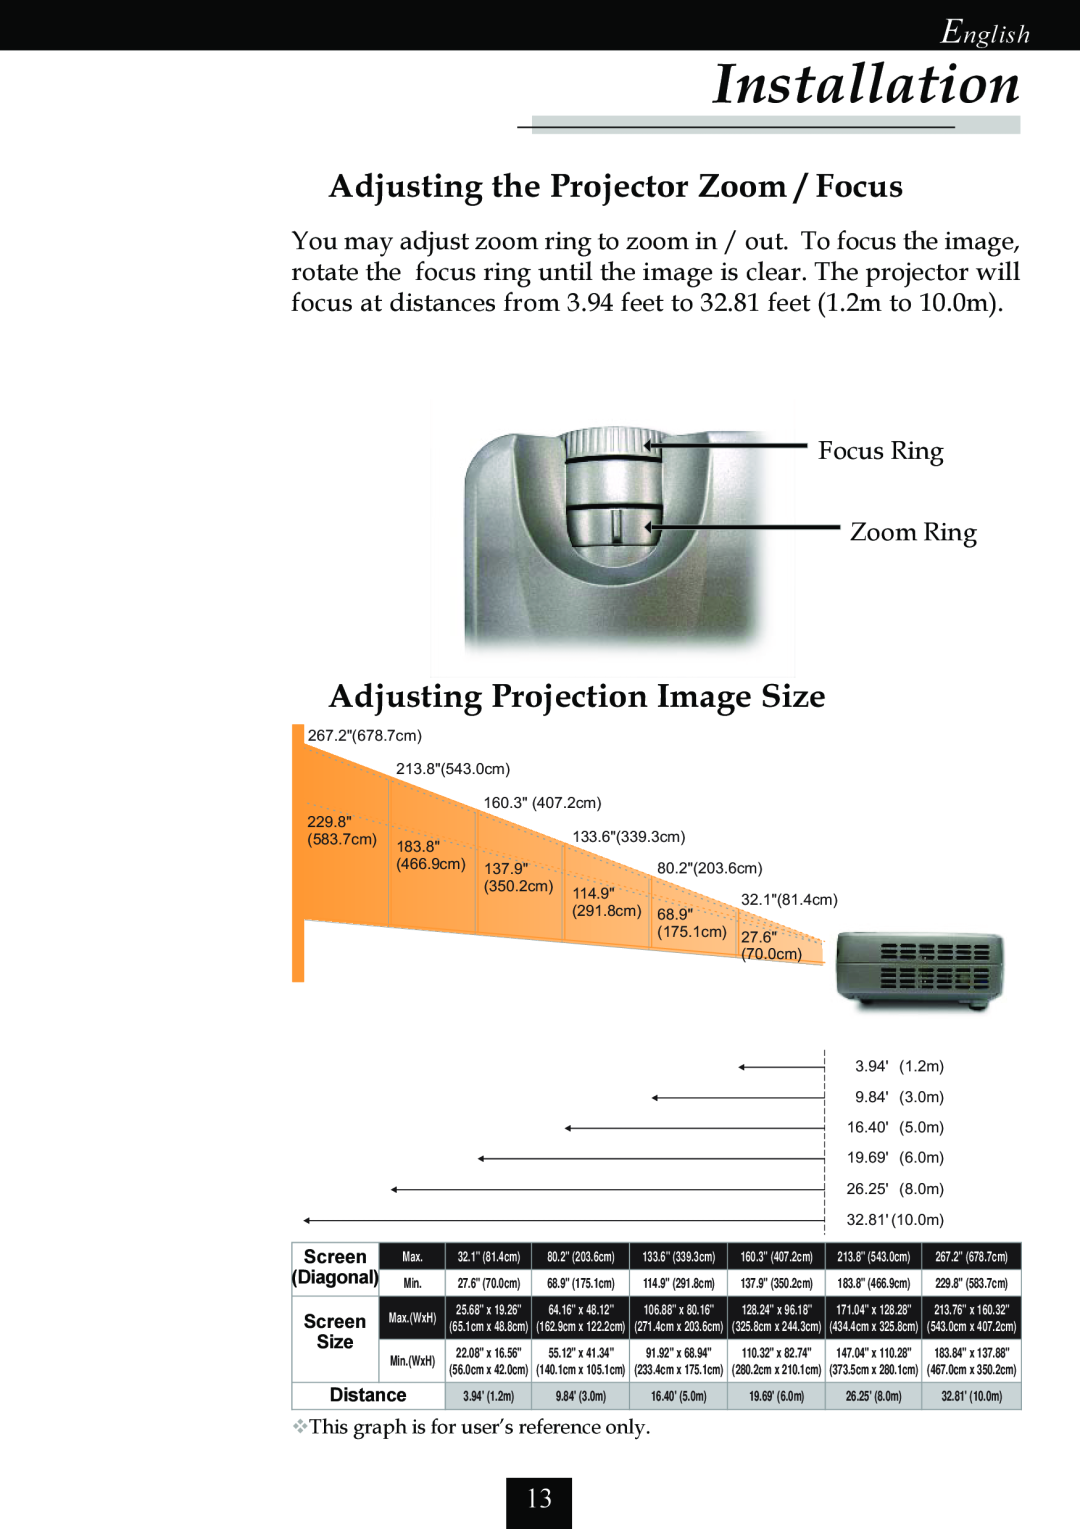 Optoma Technology EP725 Adjusting the Projector Zoom / Focus, Adjusting Projection Image Size, Installation, English 